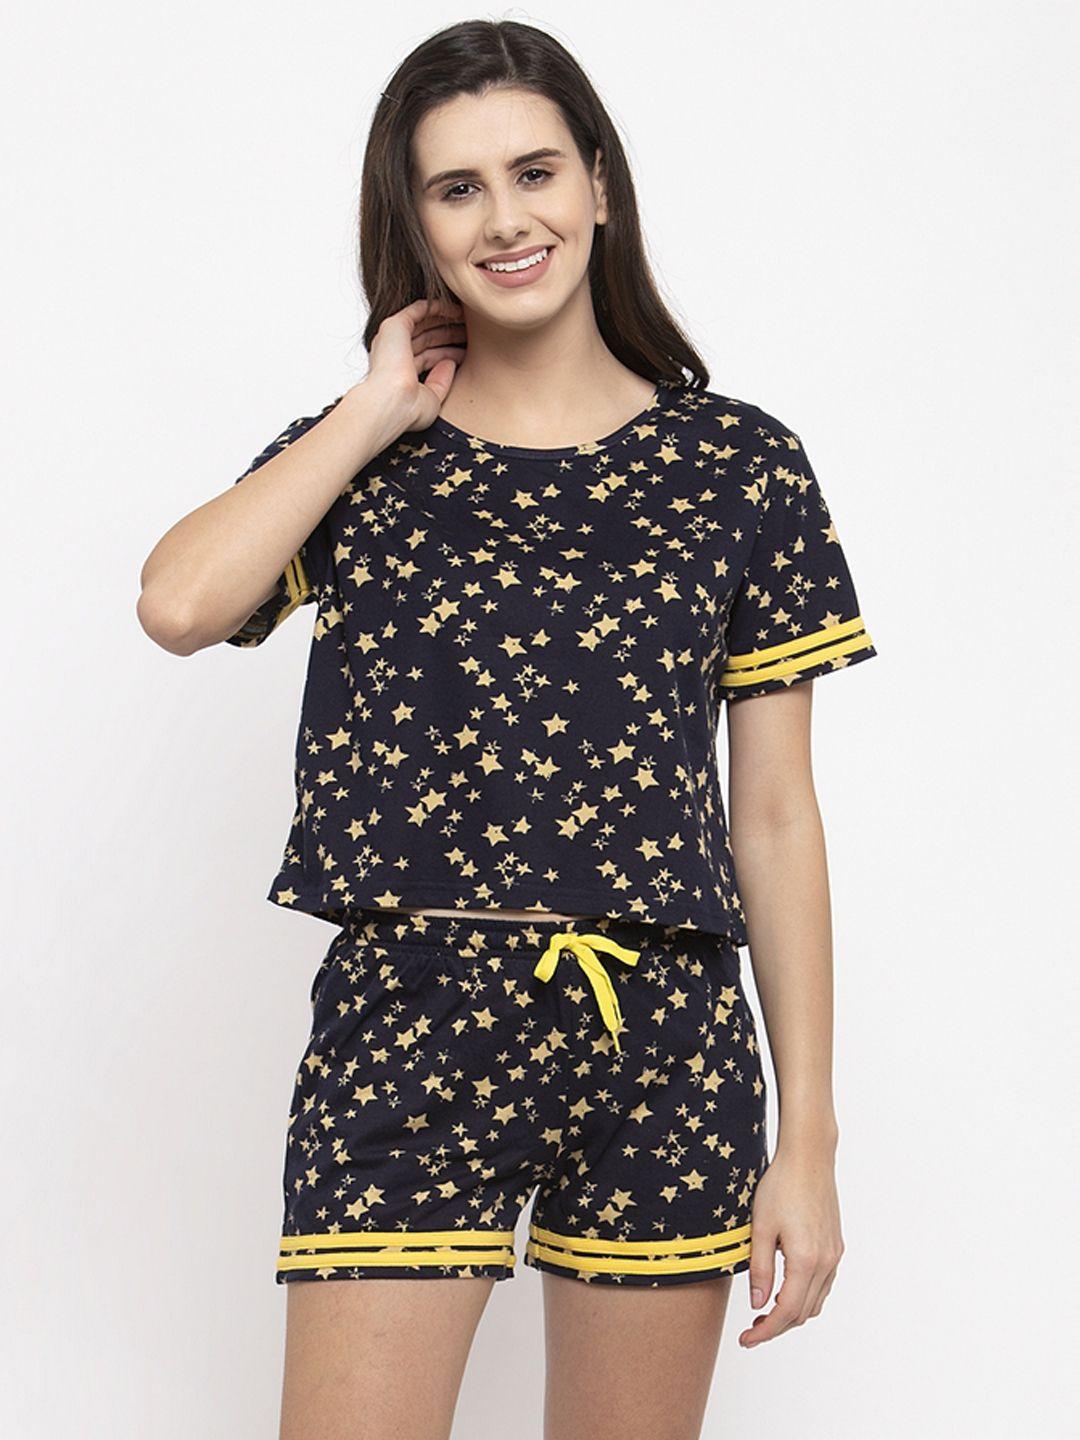 Claura Women Navy Blue & Yellow Printed Night Suit Cot-163